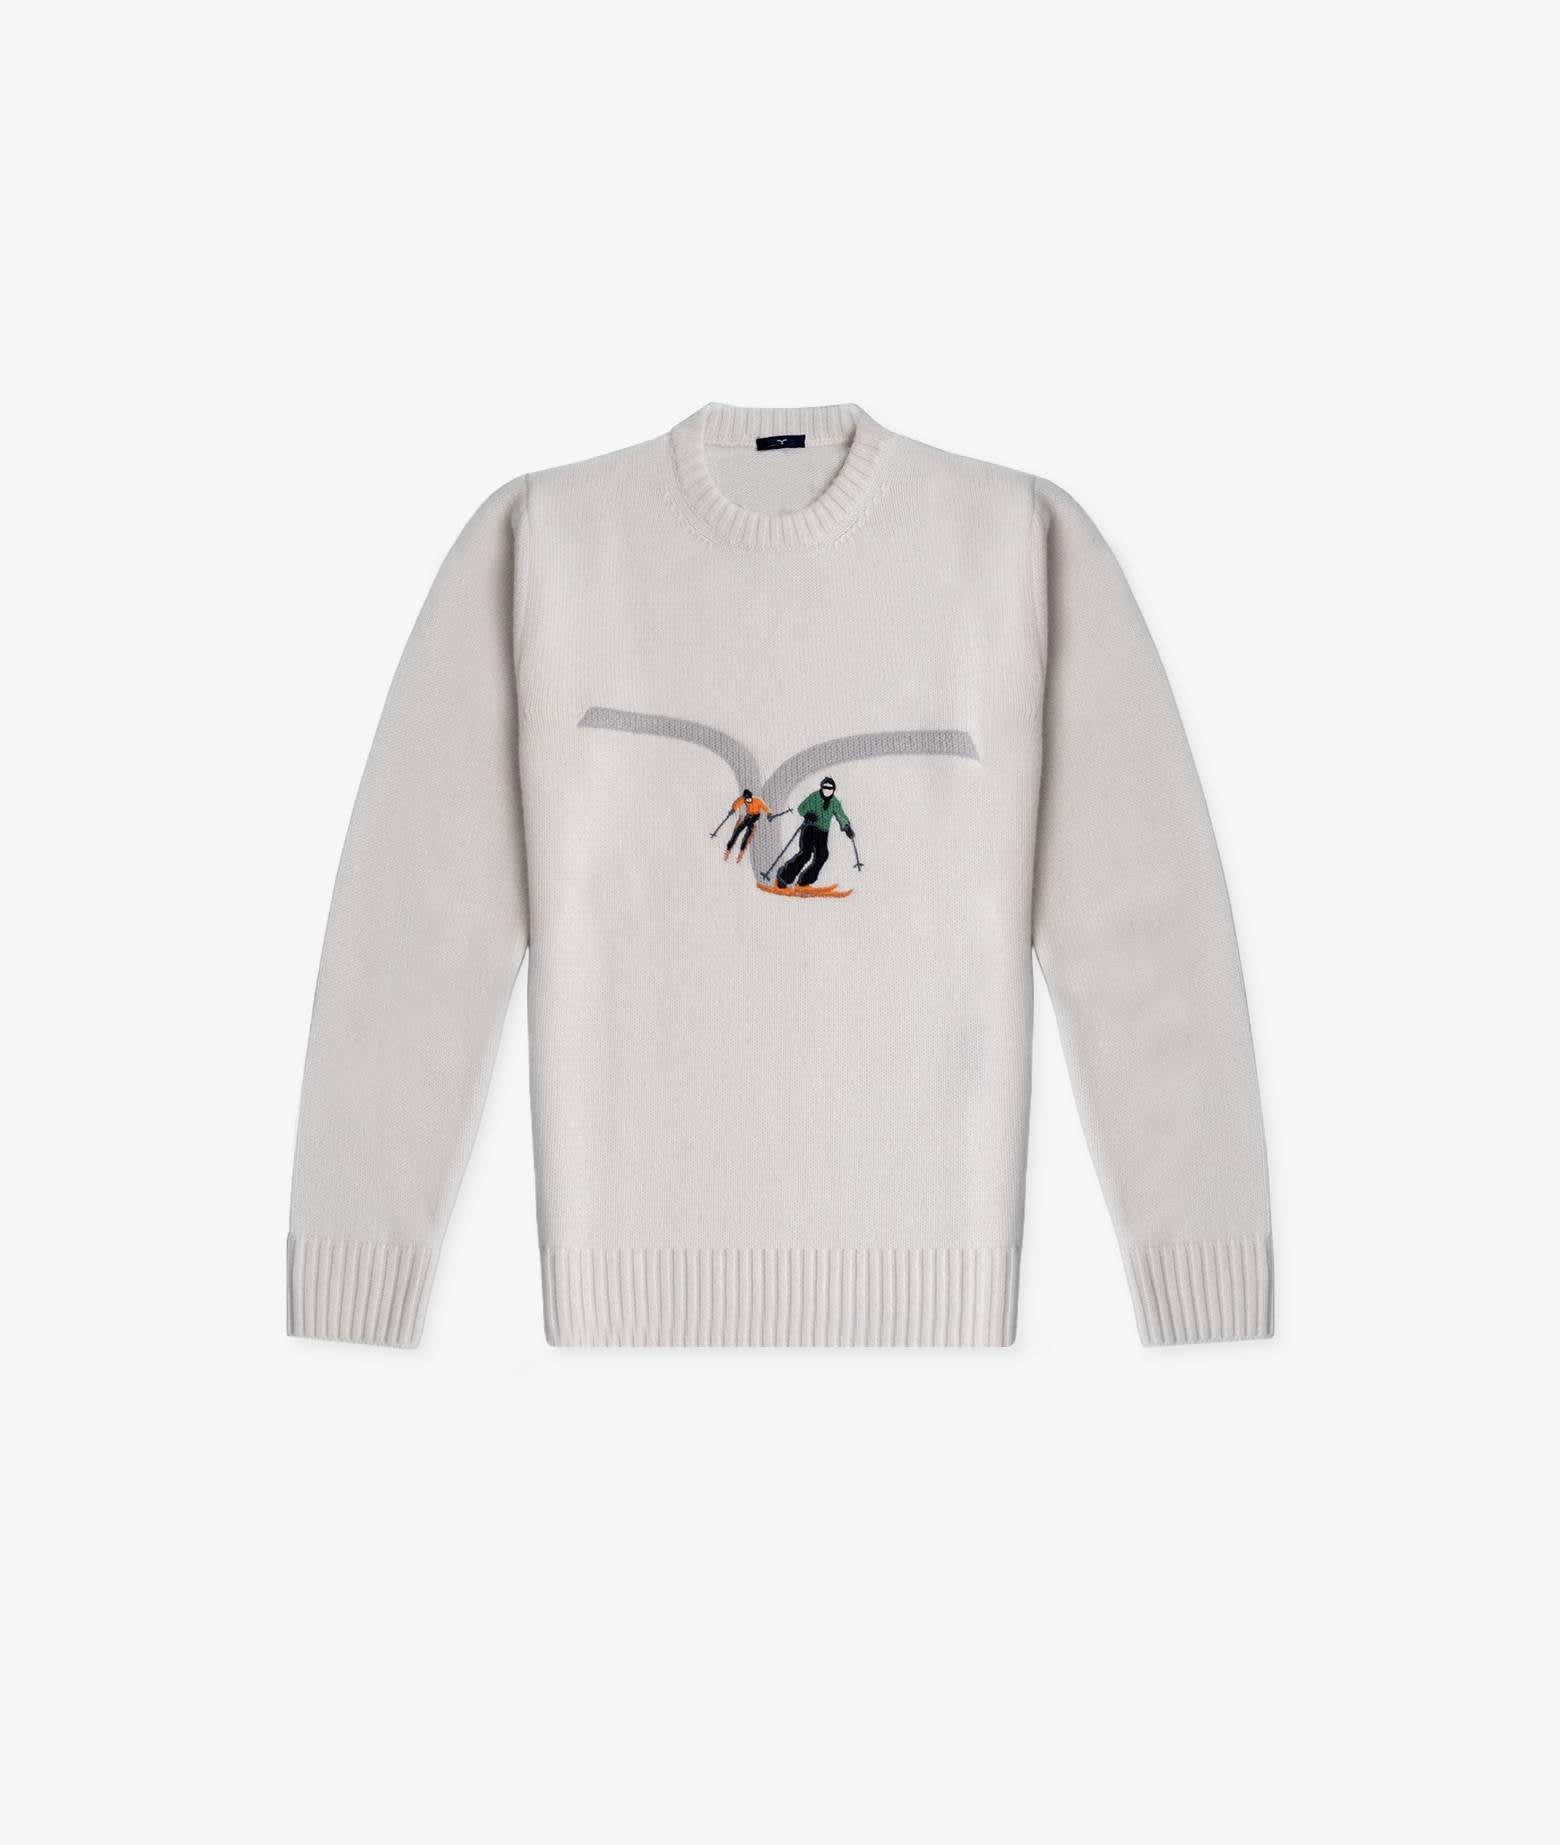 Larusmiani Sweater Ski Collection Sweater In Ivory